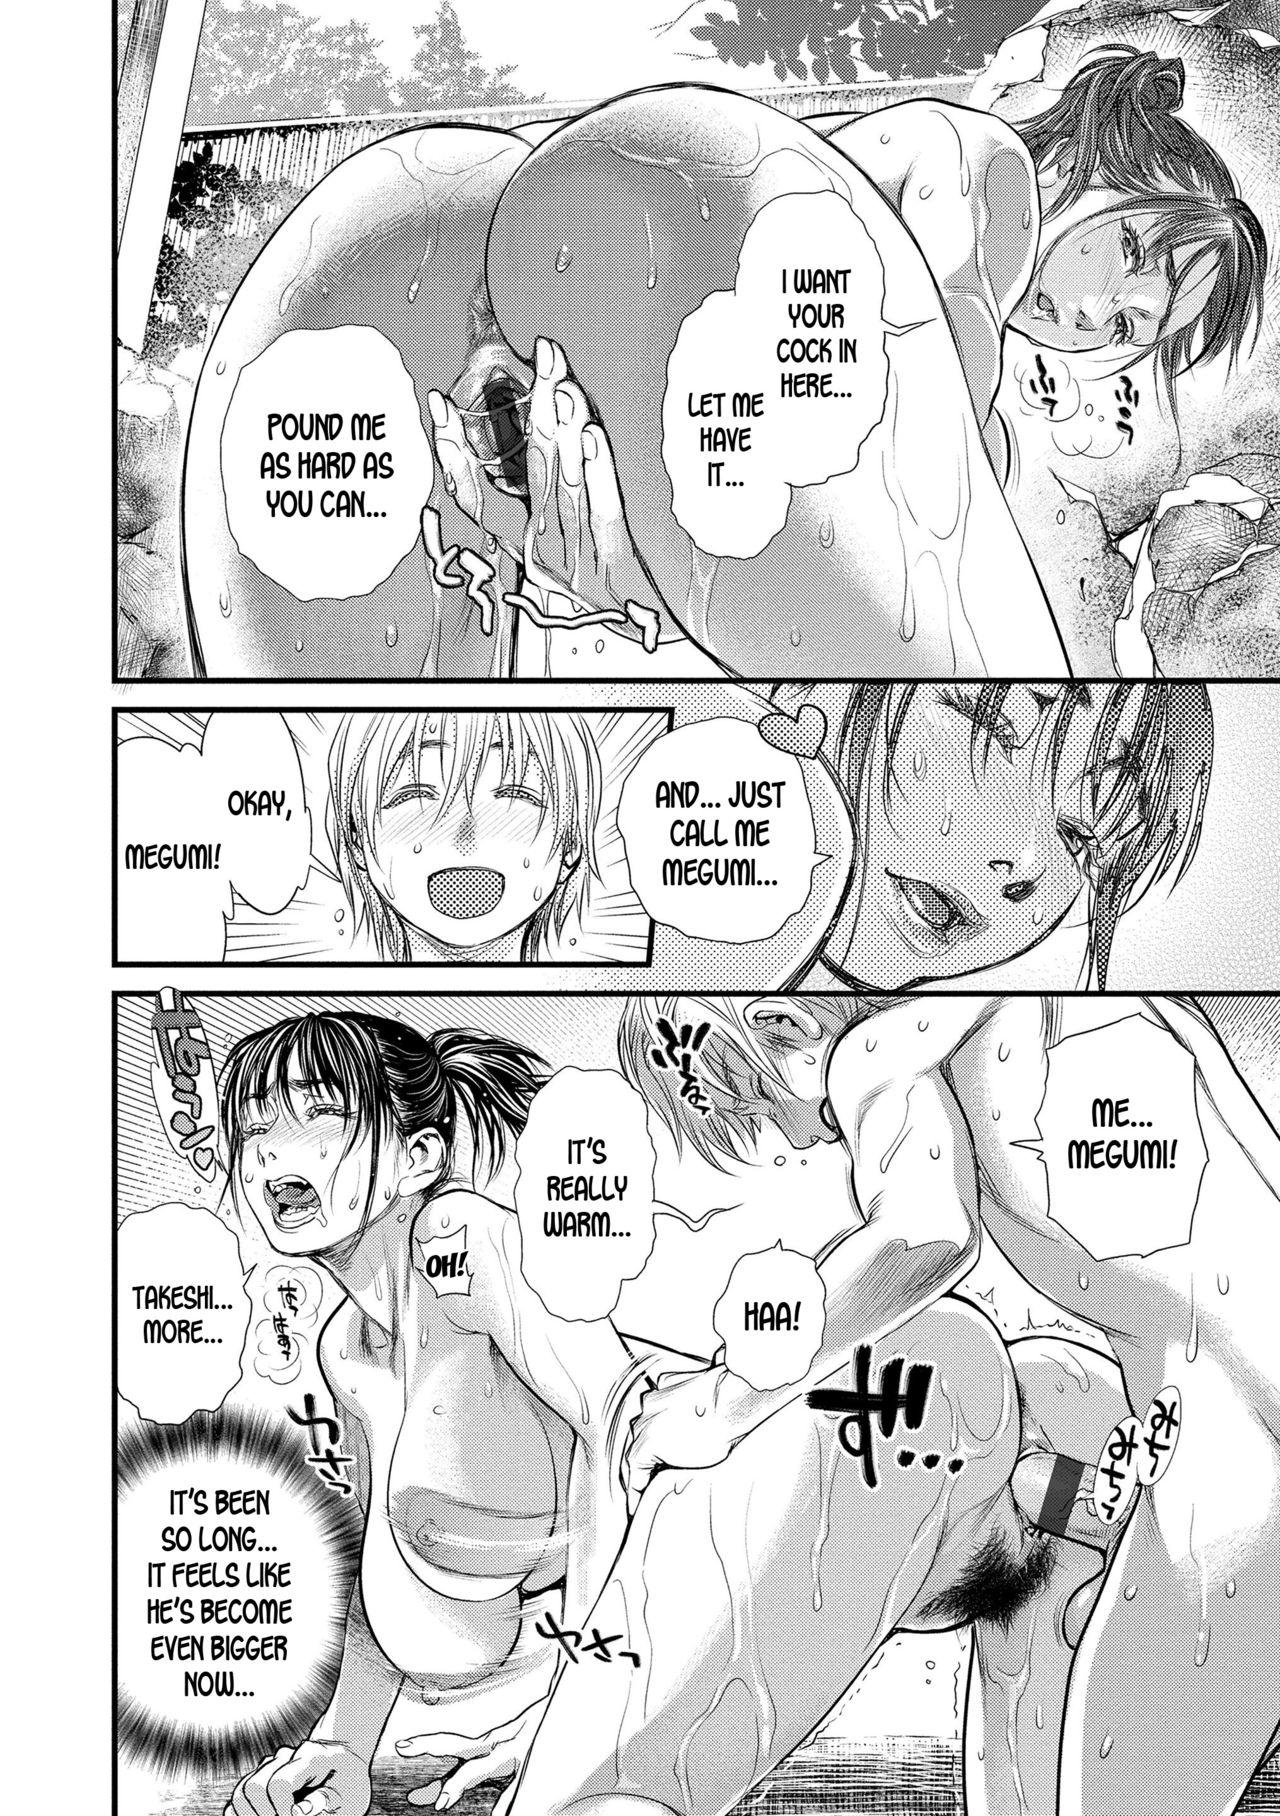 Boku to Itoko no Onee-san to | Together With My Older Cousin Ch. 3 13